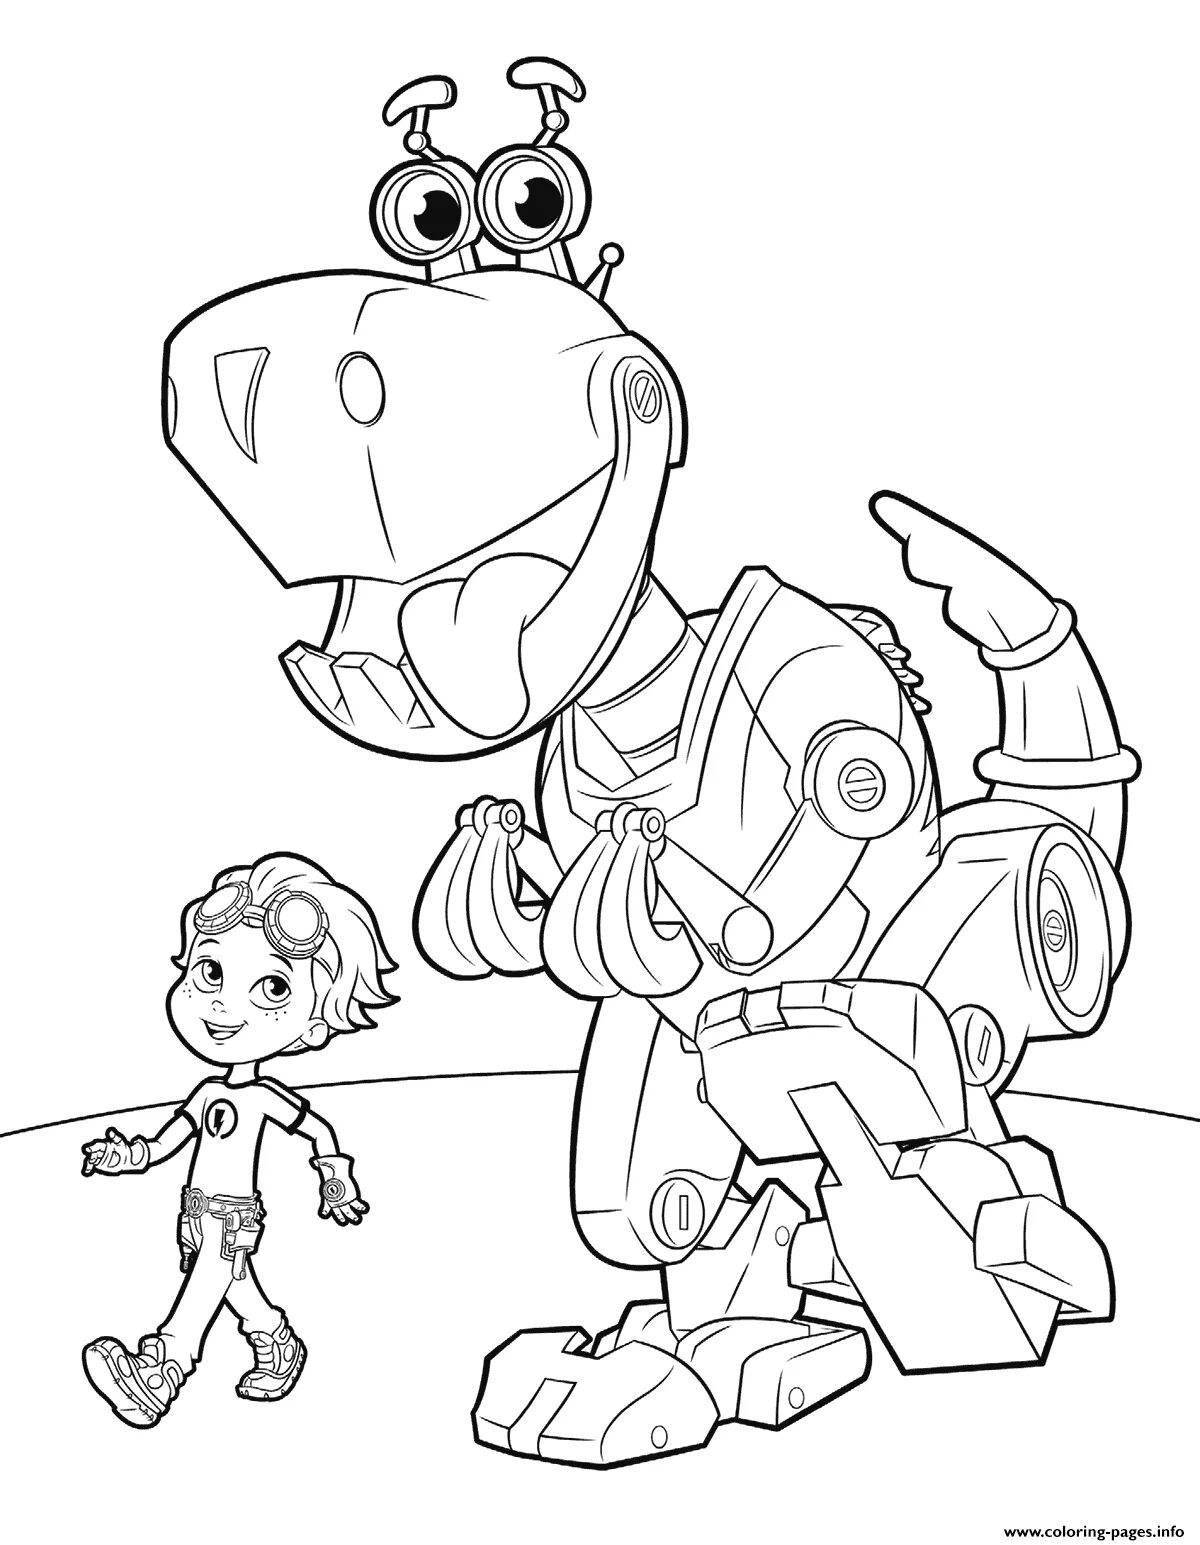 Fun coloring book for 5 year old robots